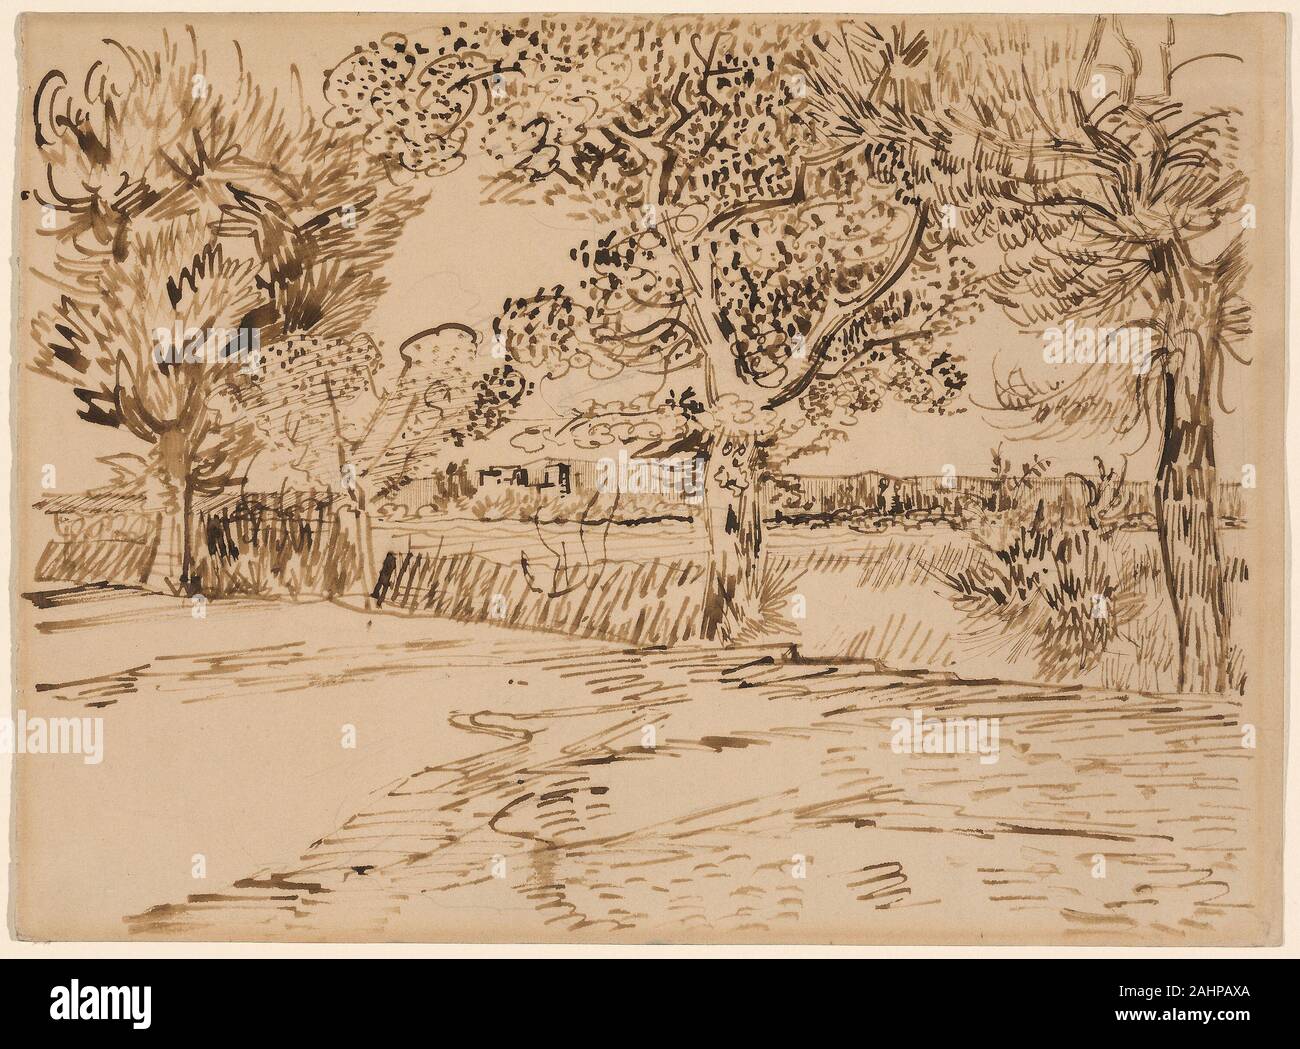 Vincent van Gogh. Landscape at Arles. 1888. Netherlands. Pen and brown ink  over graphite on cream wove paper Stock Photo - Alamy